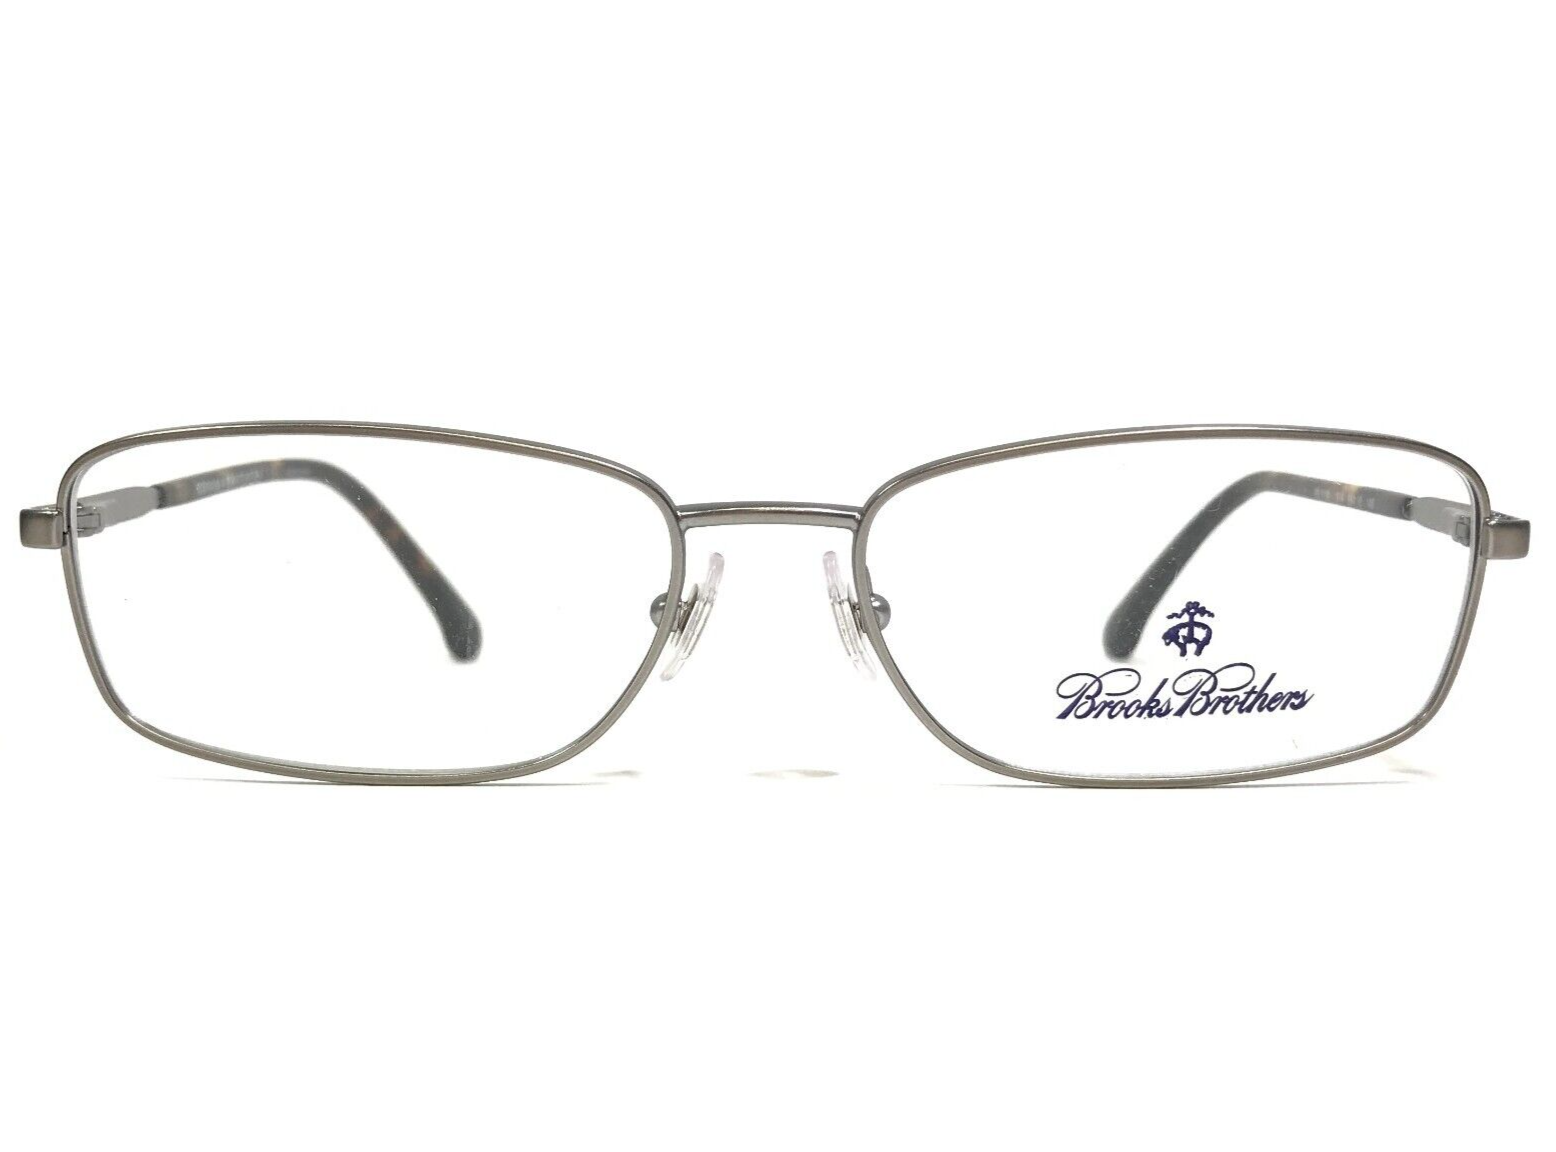 Primary image for Brooks Brothers Eyeglasses Frames BB1036 1514 Tortoise Gray Wire Rim 55-16-145